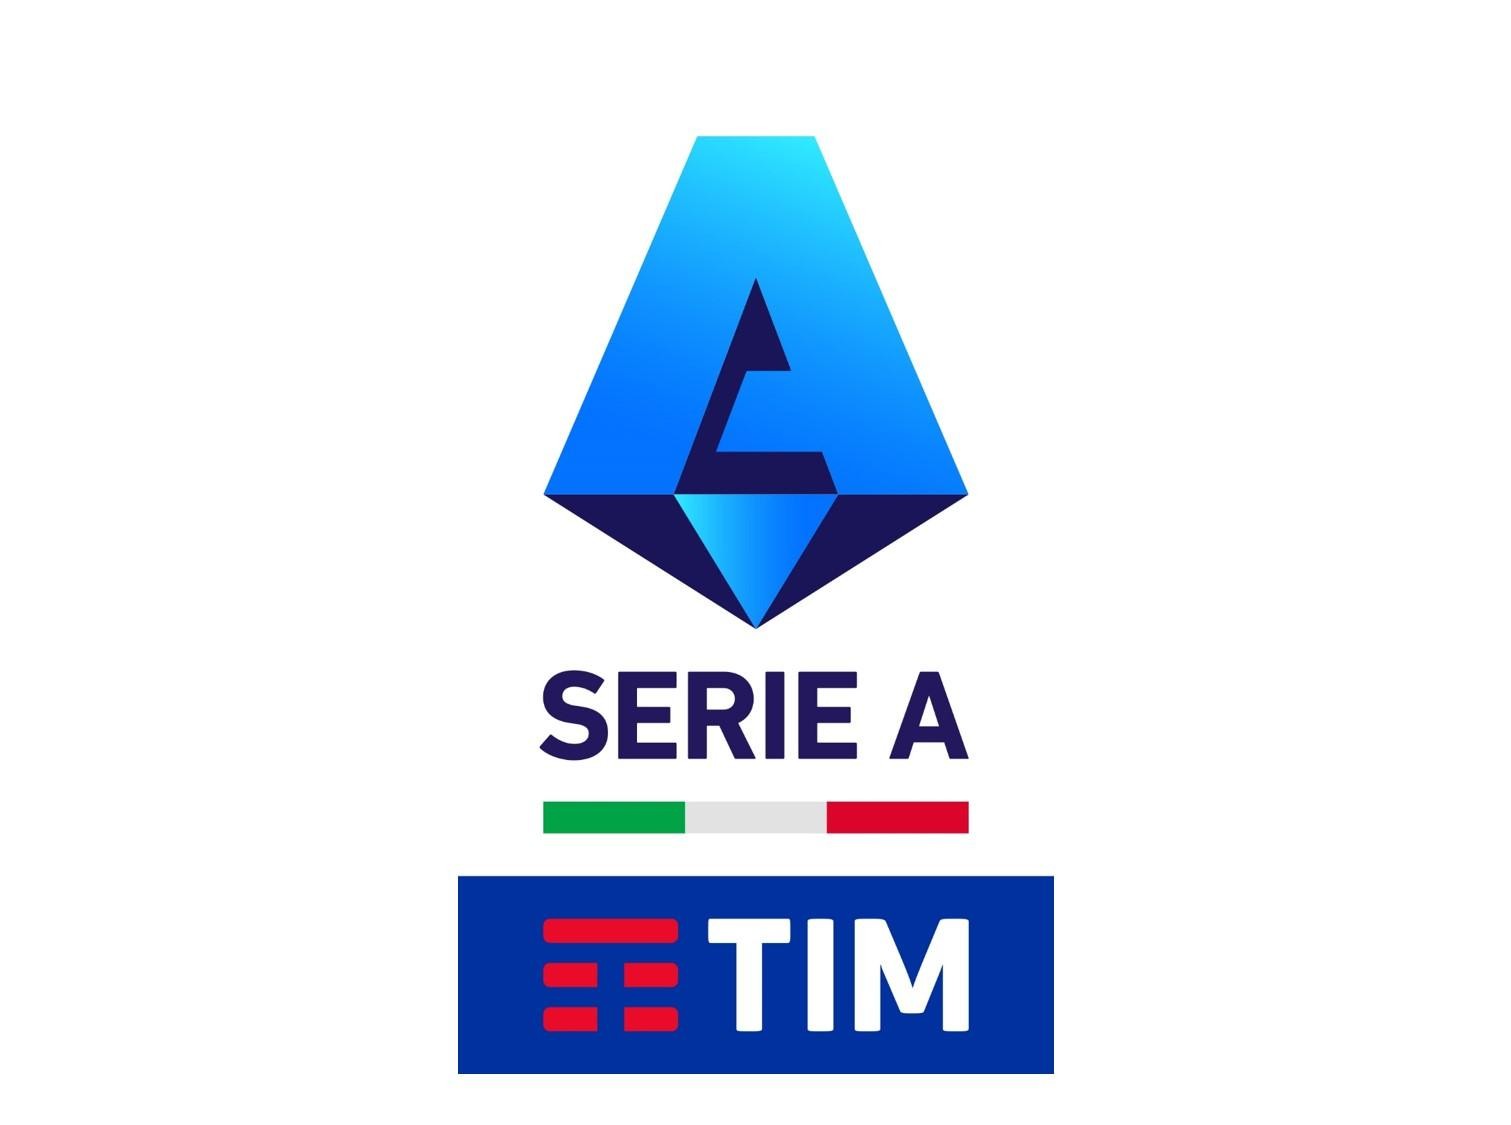 SERIE A 2022/2023 FIXTURES – CRITERIA AND RESTRICTIONS